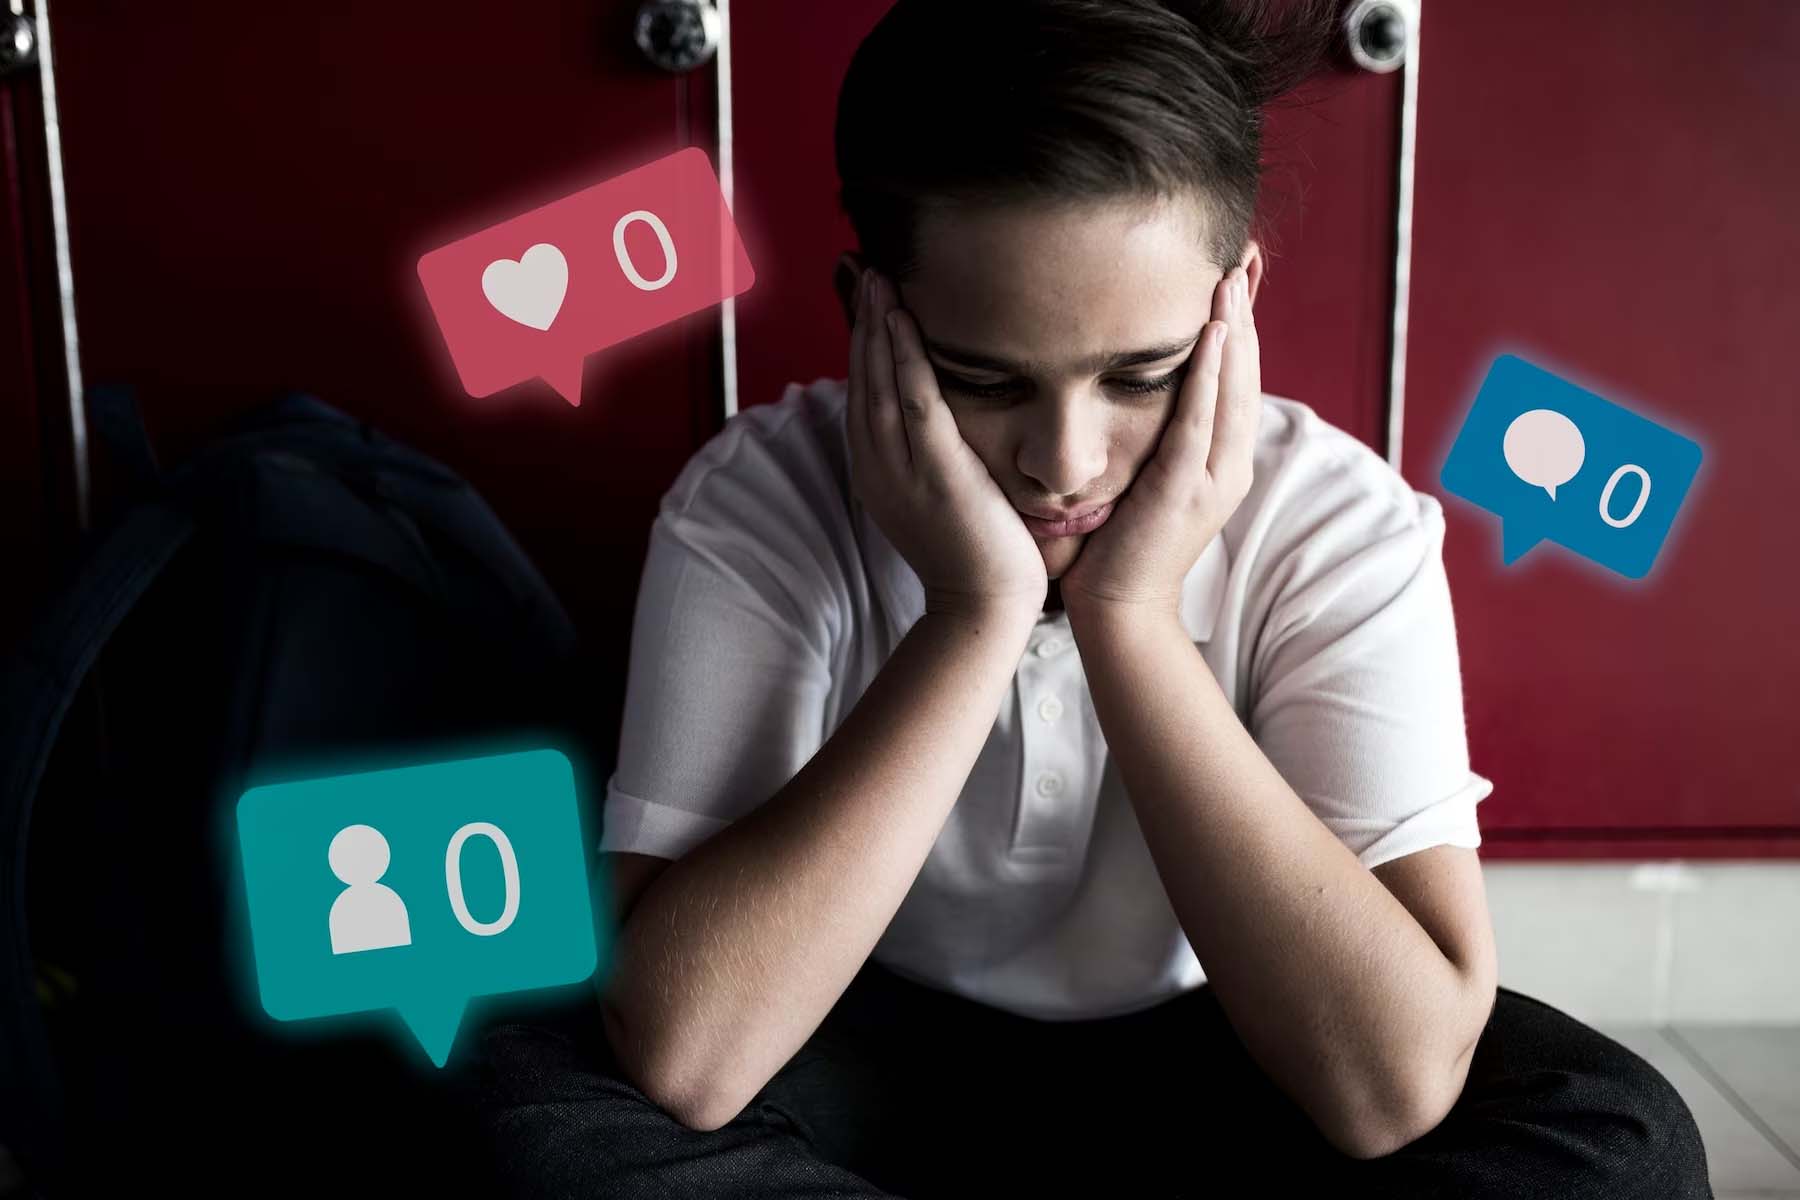 Unhappy teenager with few social media engagement